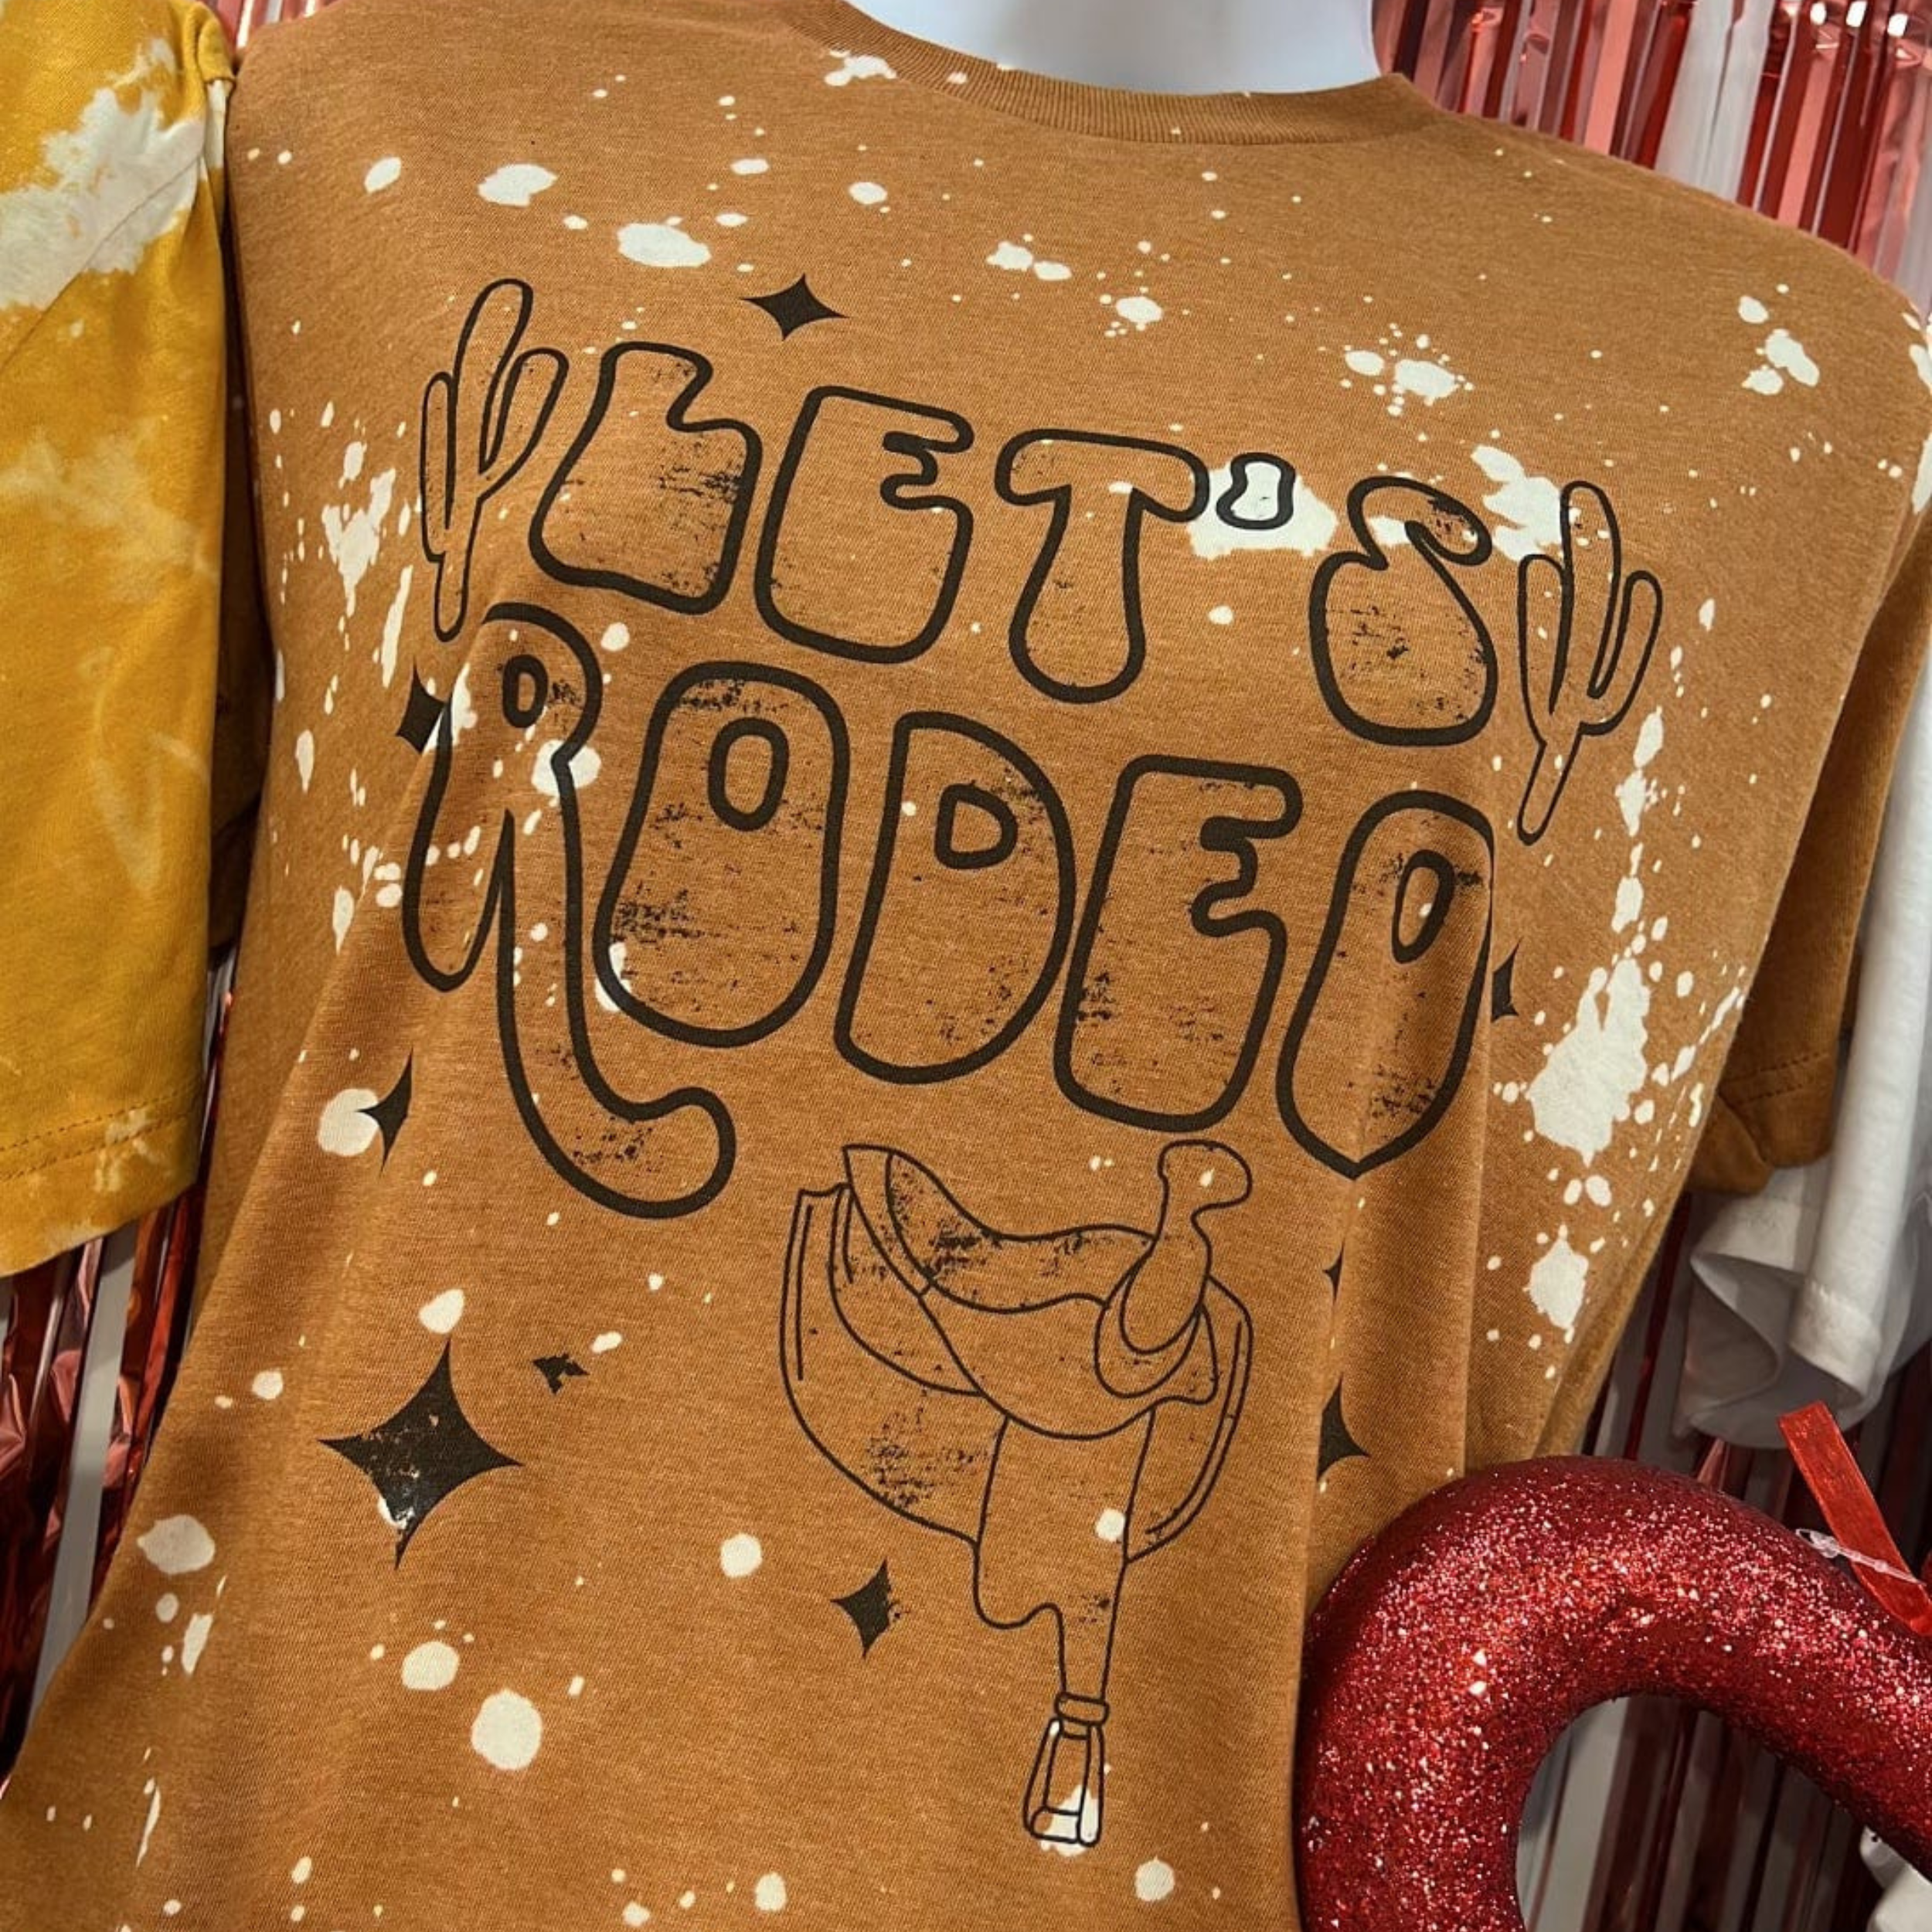 A brown short sleeve tee with a bleach splatter pattern. "Let's Rodeo" is featured in the center in outlined bubble letters. There is cacti on either side of the text, a saddle off to the right under the text, and sparkles throughout the text. Item is pictured on a multicolor background with white, yellow, and red